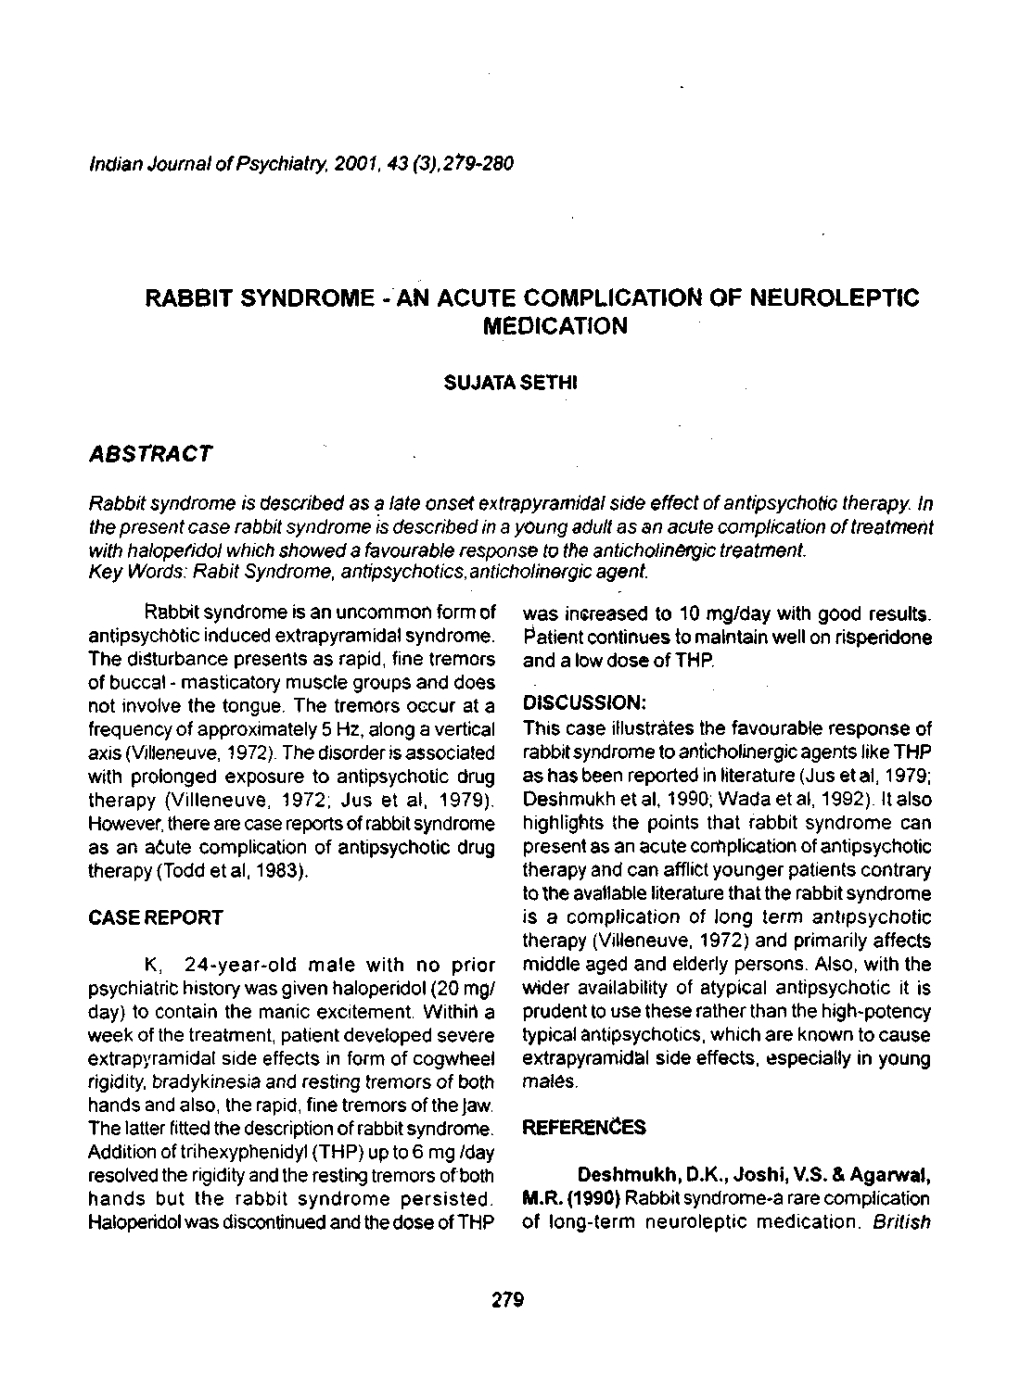 Rabbit Syndrome - an Acute Complication of Neuroleptic Medication